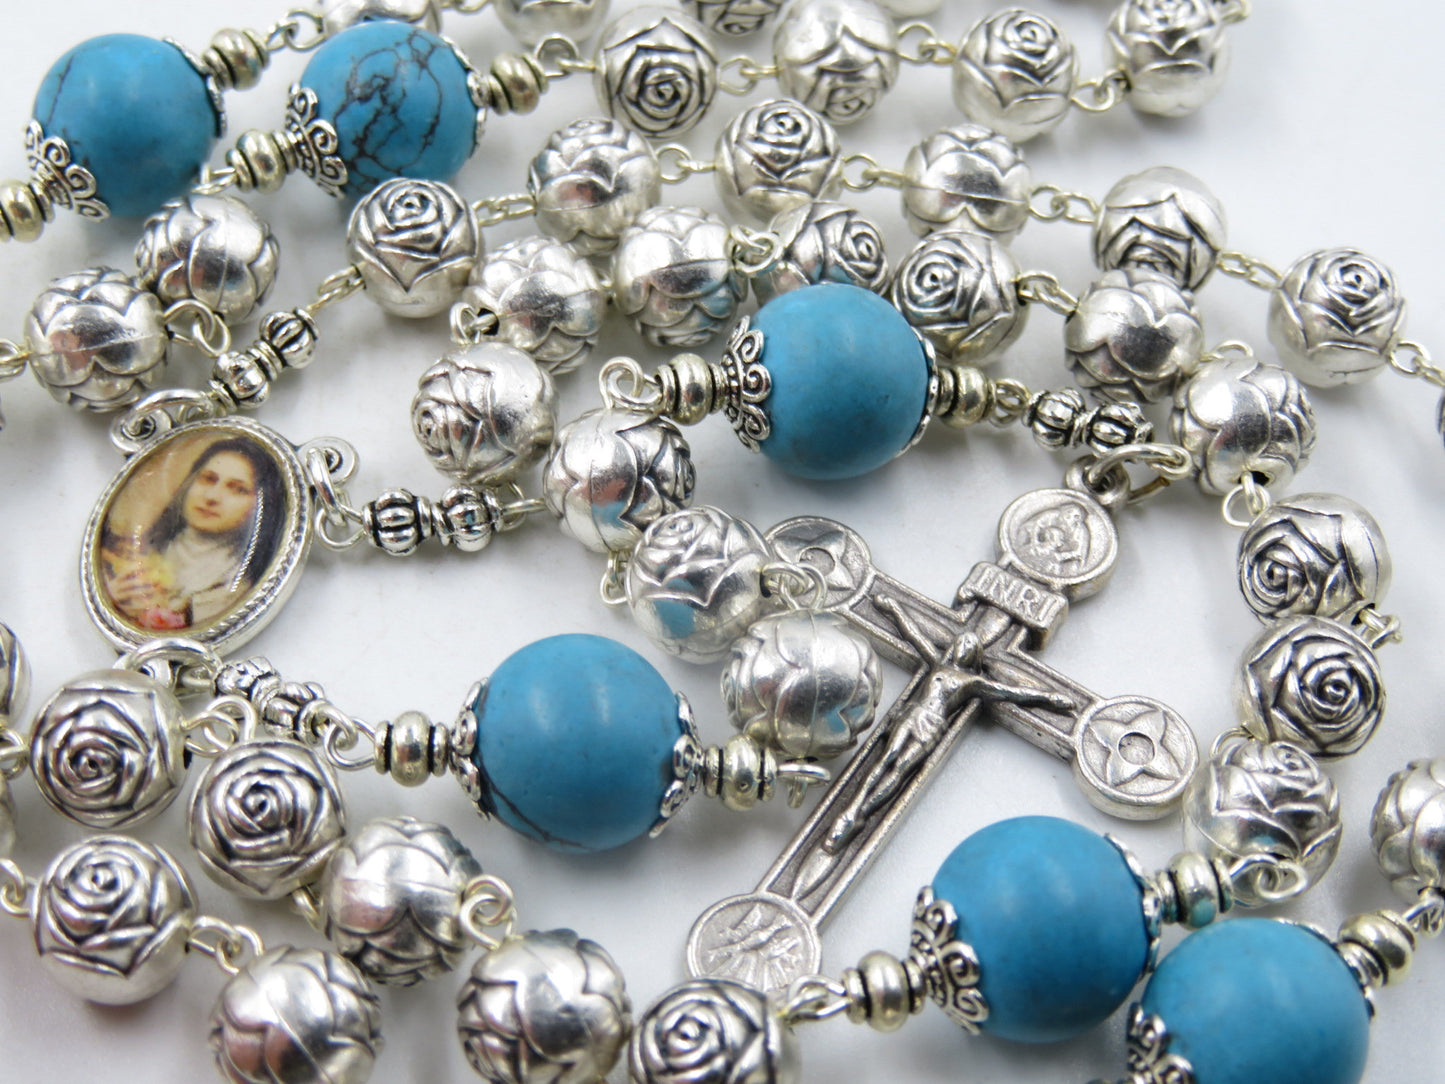 Saint Therese of Lisieux Rose Rosary Beads, Silver Rose flower bead Rosary, Forgiveness Crucifix, Wedding gift, Rosaries, Confirmation gift.